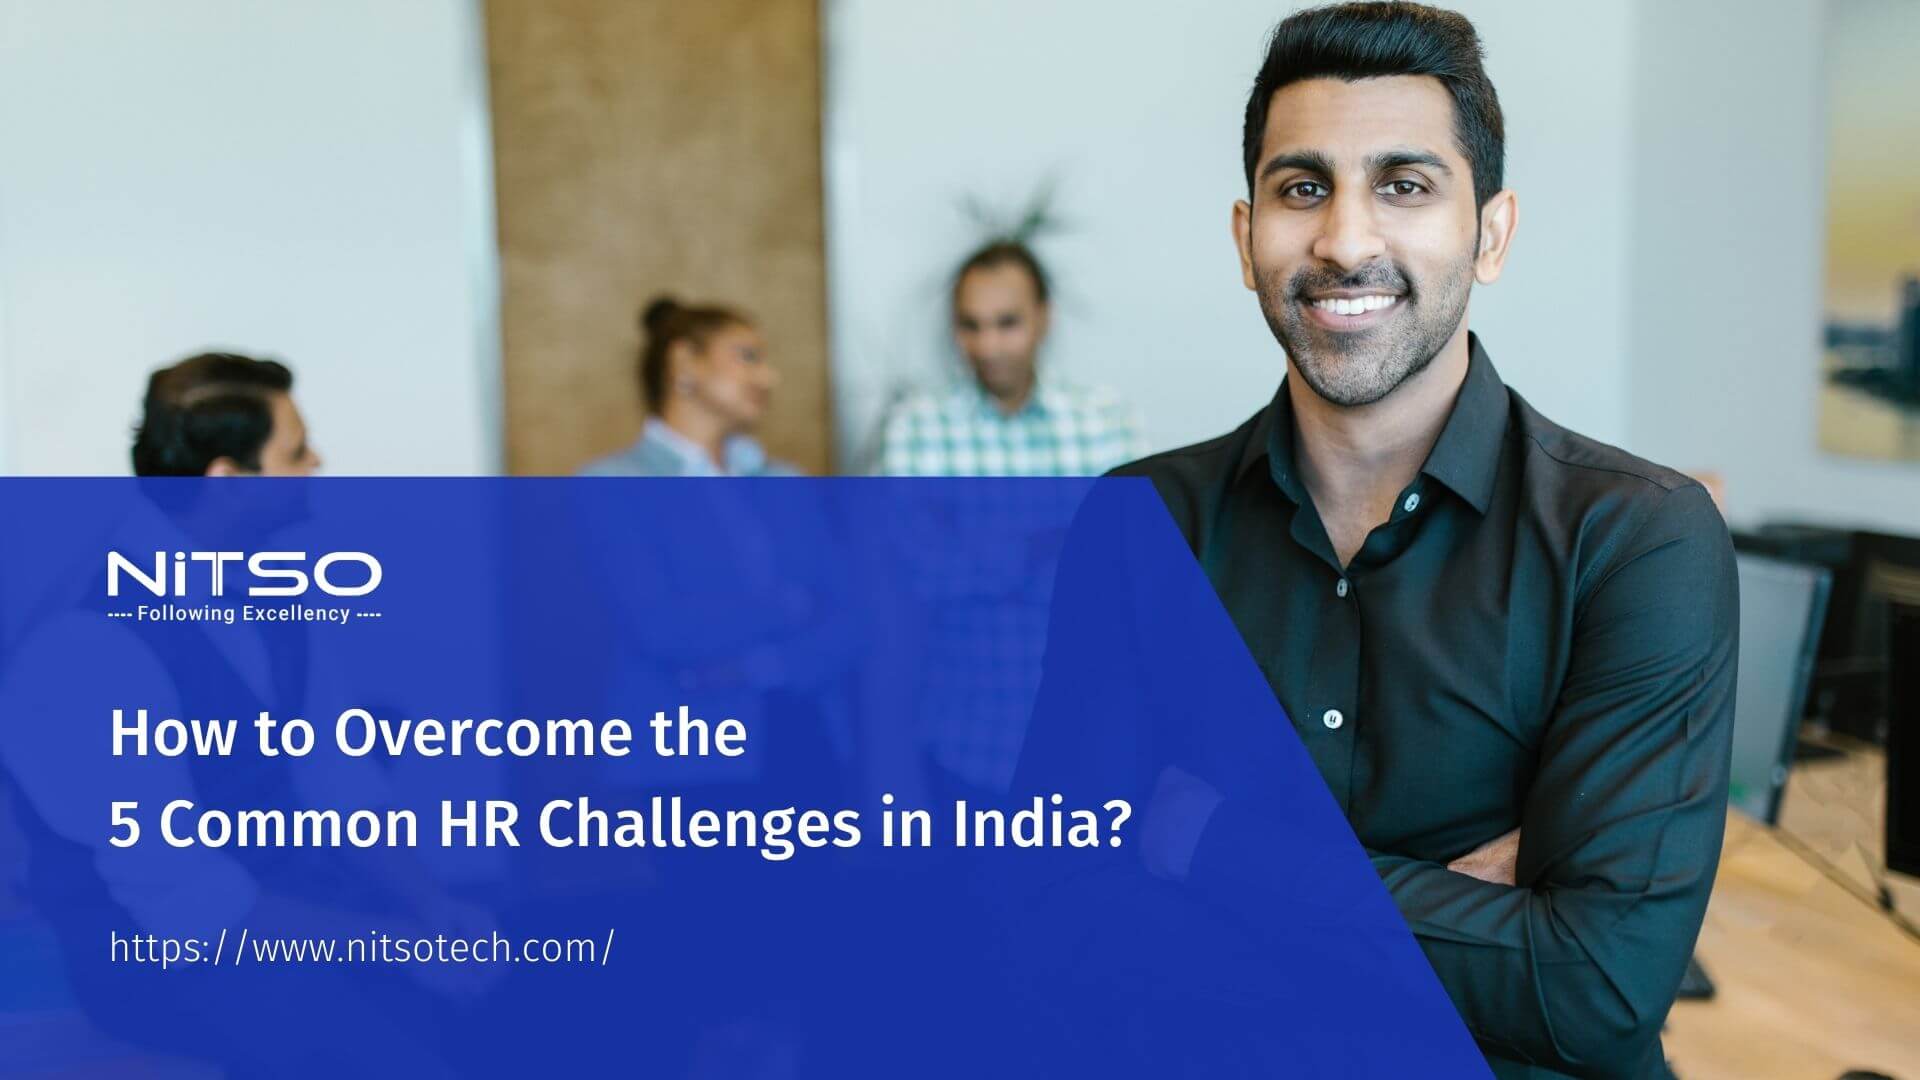 How to Overcome the 5 Common HR Challenges in India